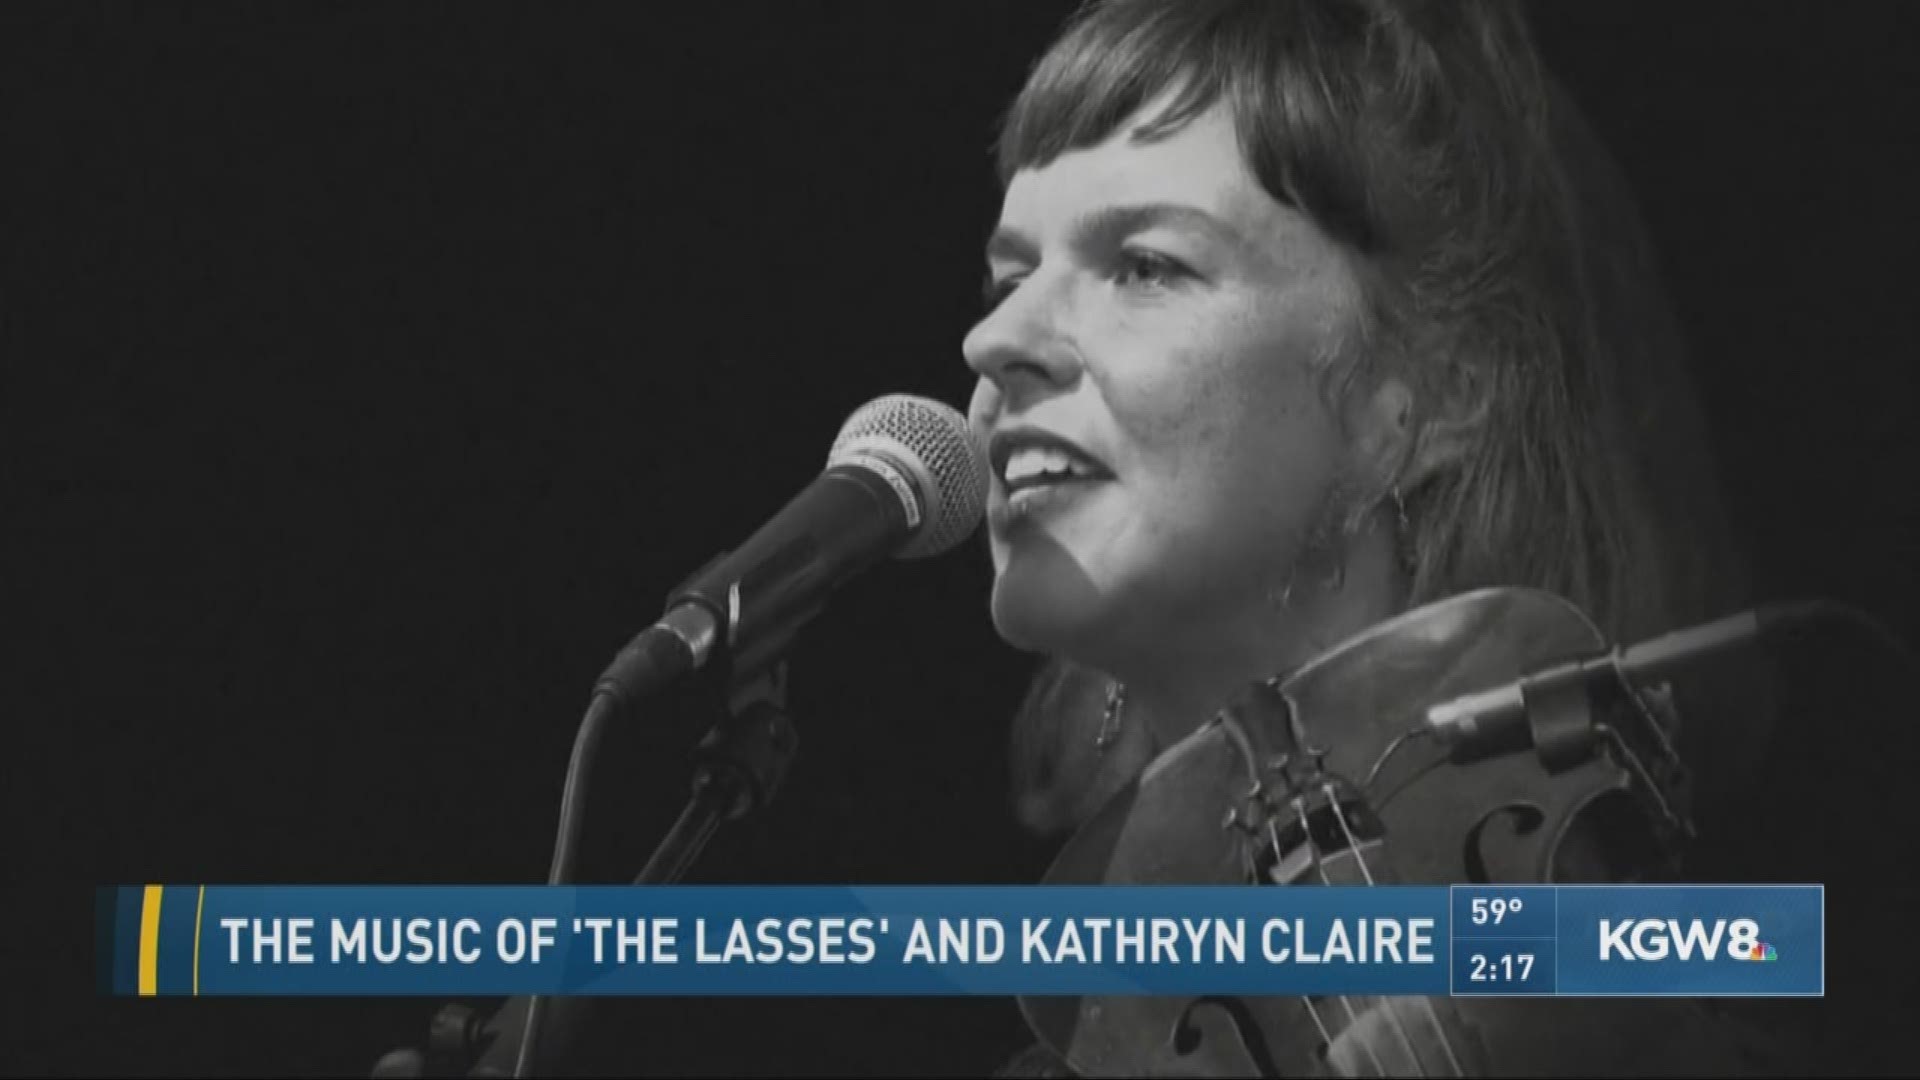 The music of 'The Lasses' and Kathryn Claire